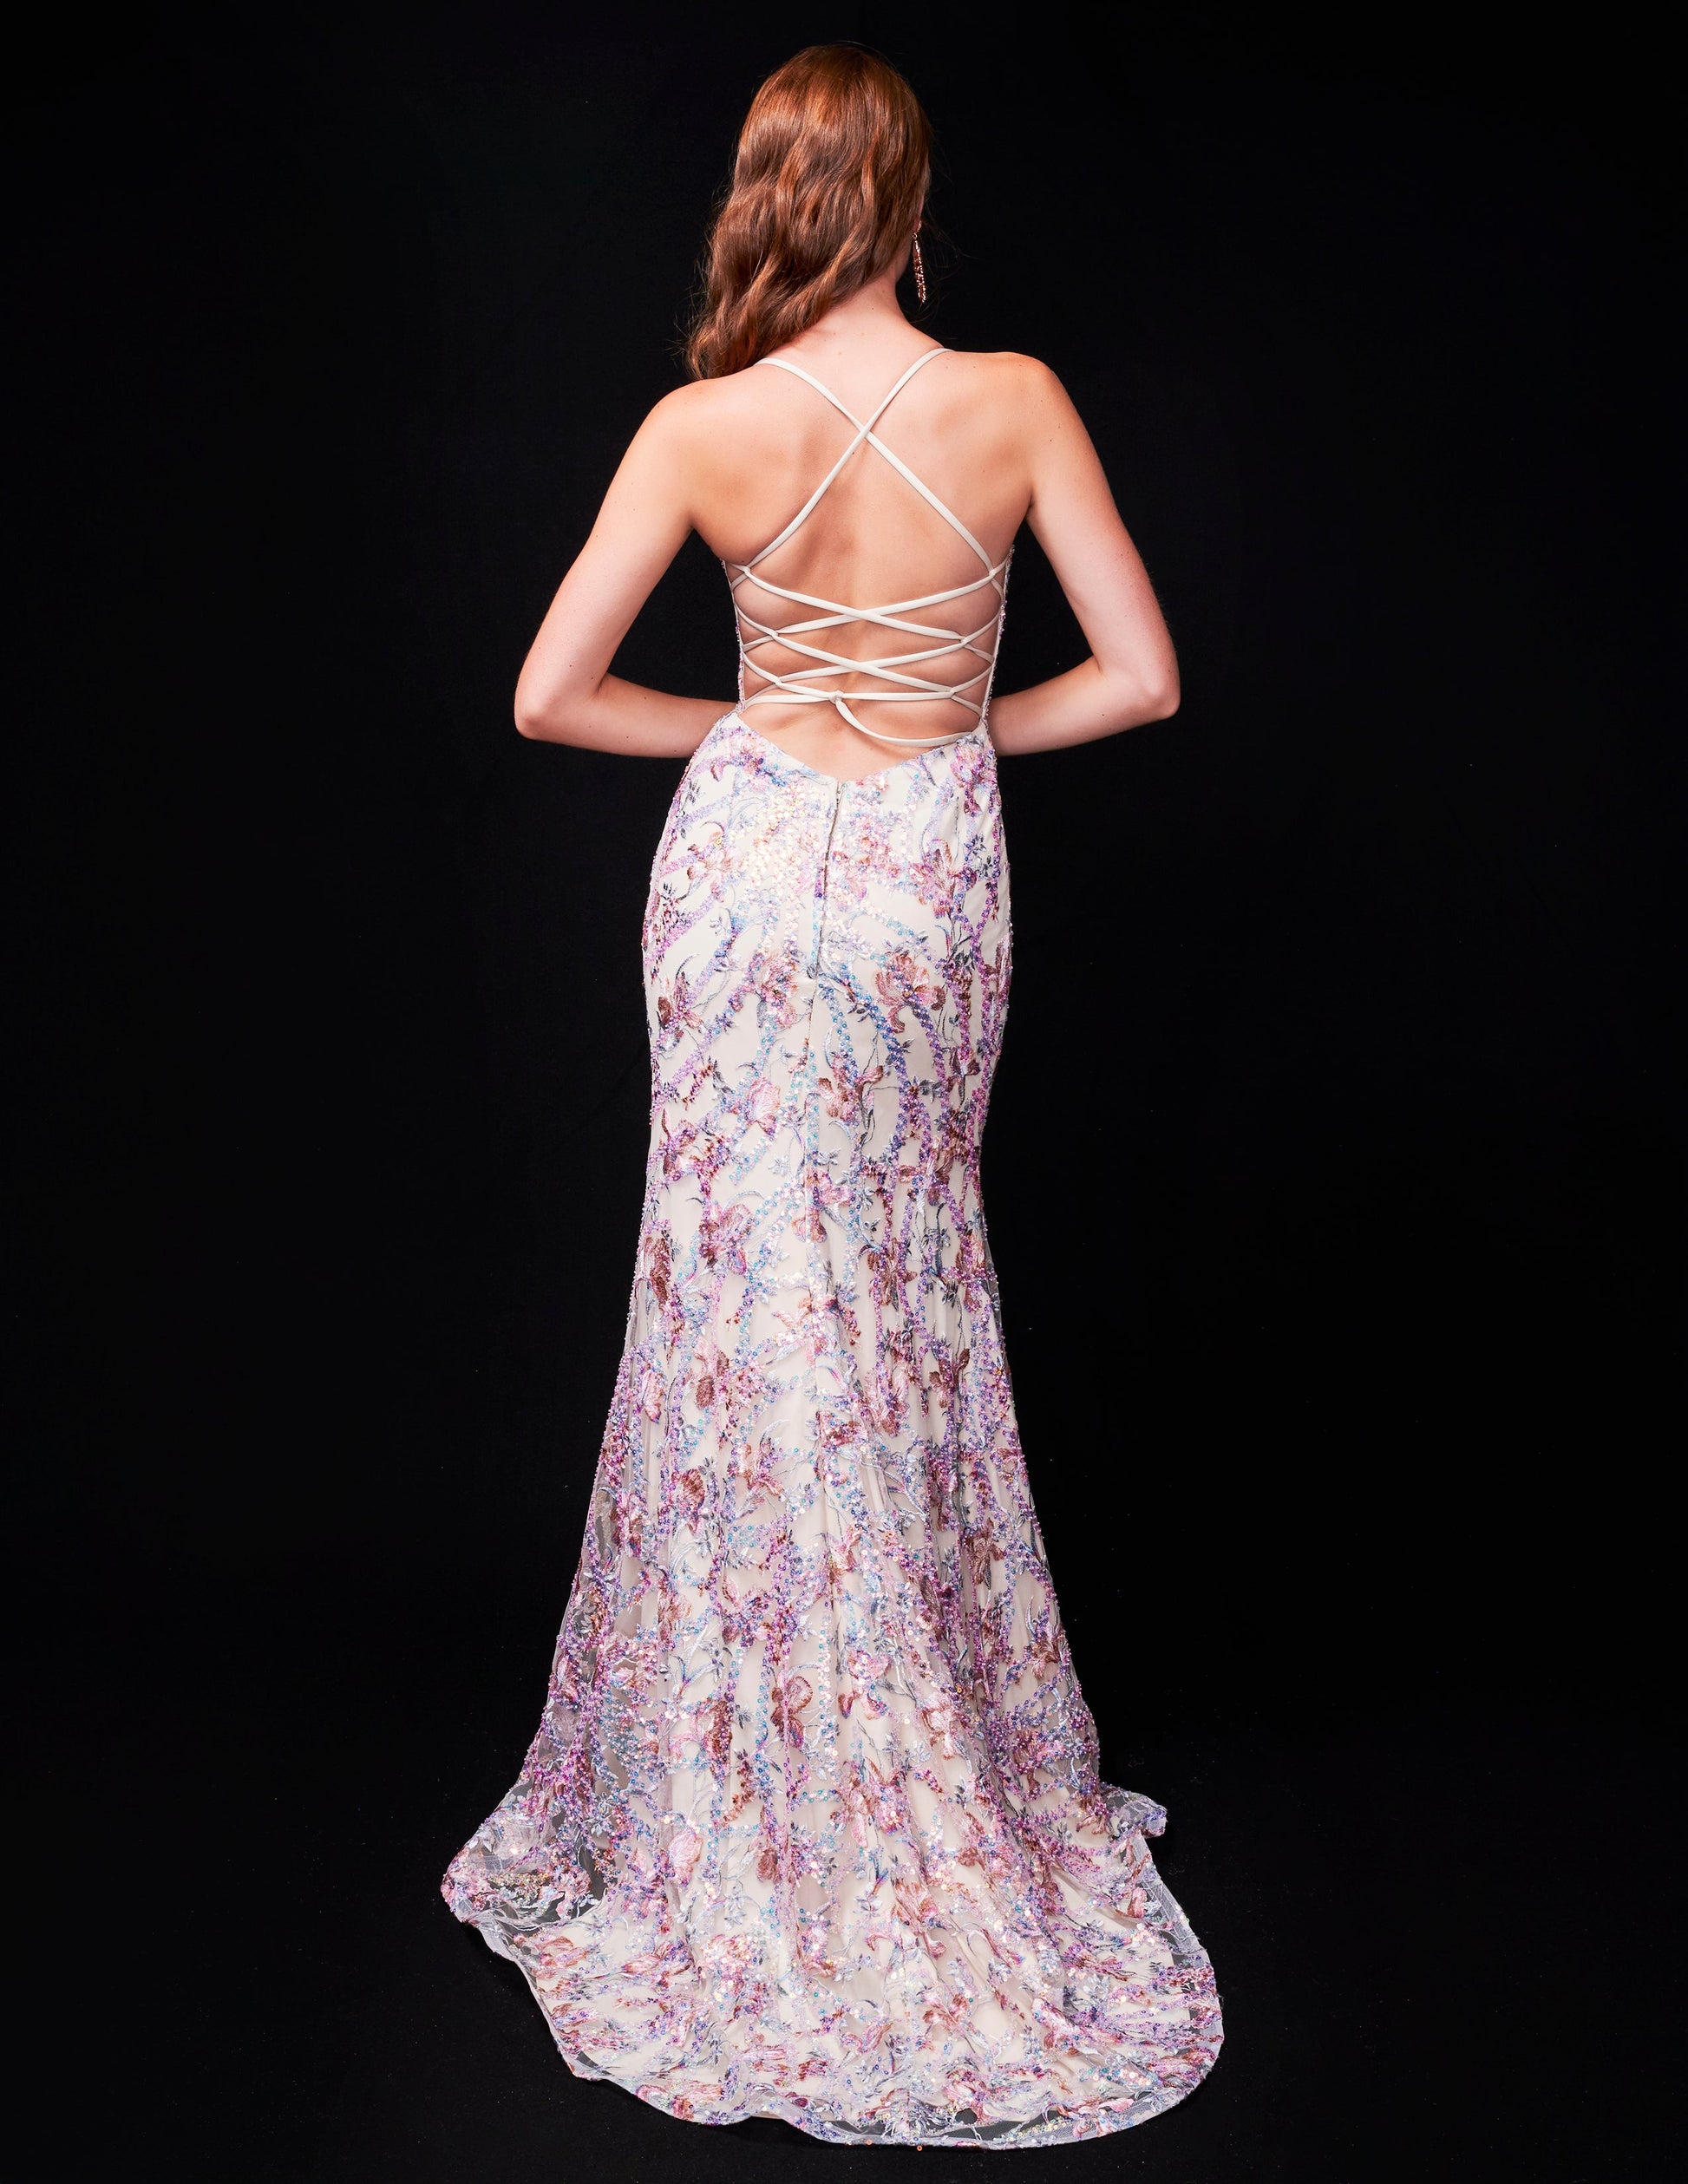 This Nina Canacci 2372 formal dress features intricate beading, a backless corset design, and a sequin-adorned gown with a V-neck and thigh-high slit. Show off your figure in this fitted dress, perfect for any formal occasion.